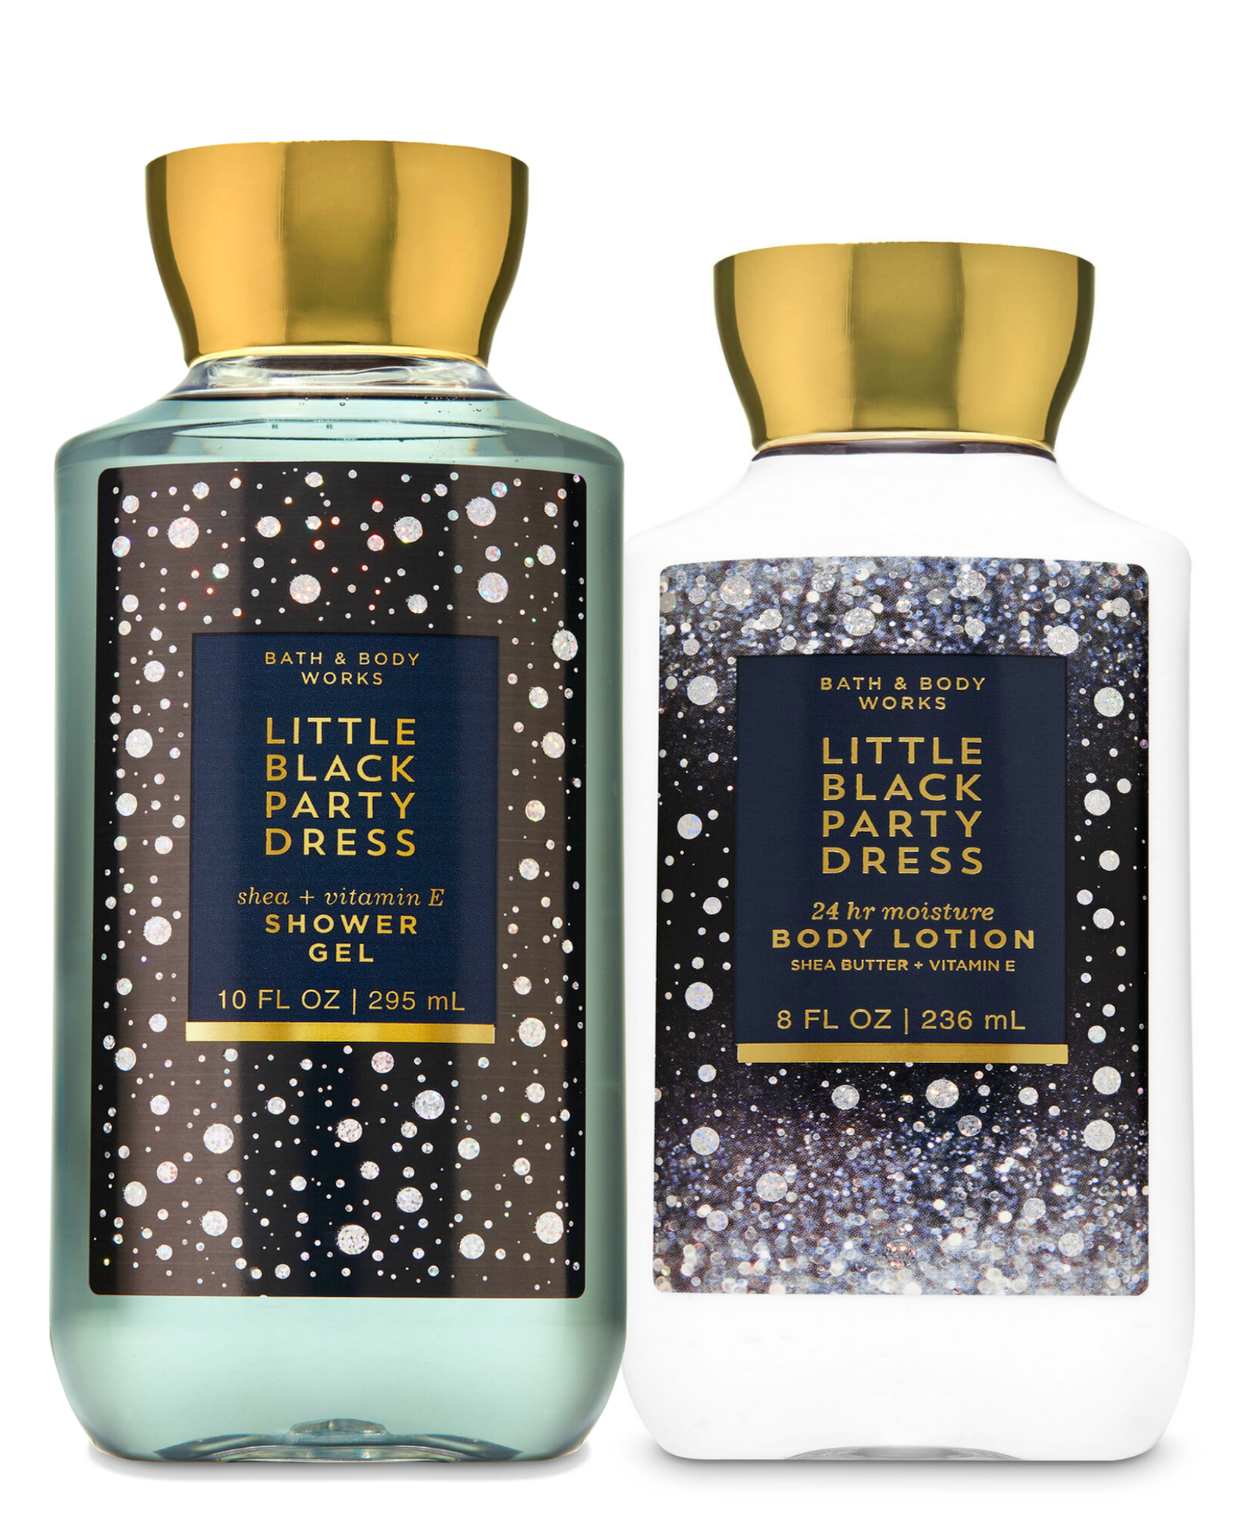 Primary image for Bath & Body Works Little Black Party Dress Body Lotion + Shower Gel Duo Set